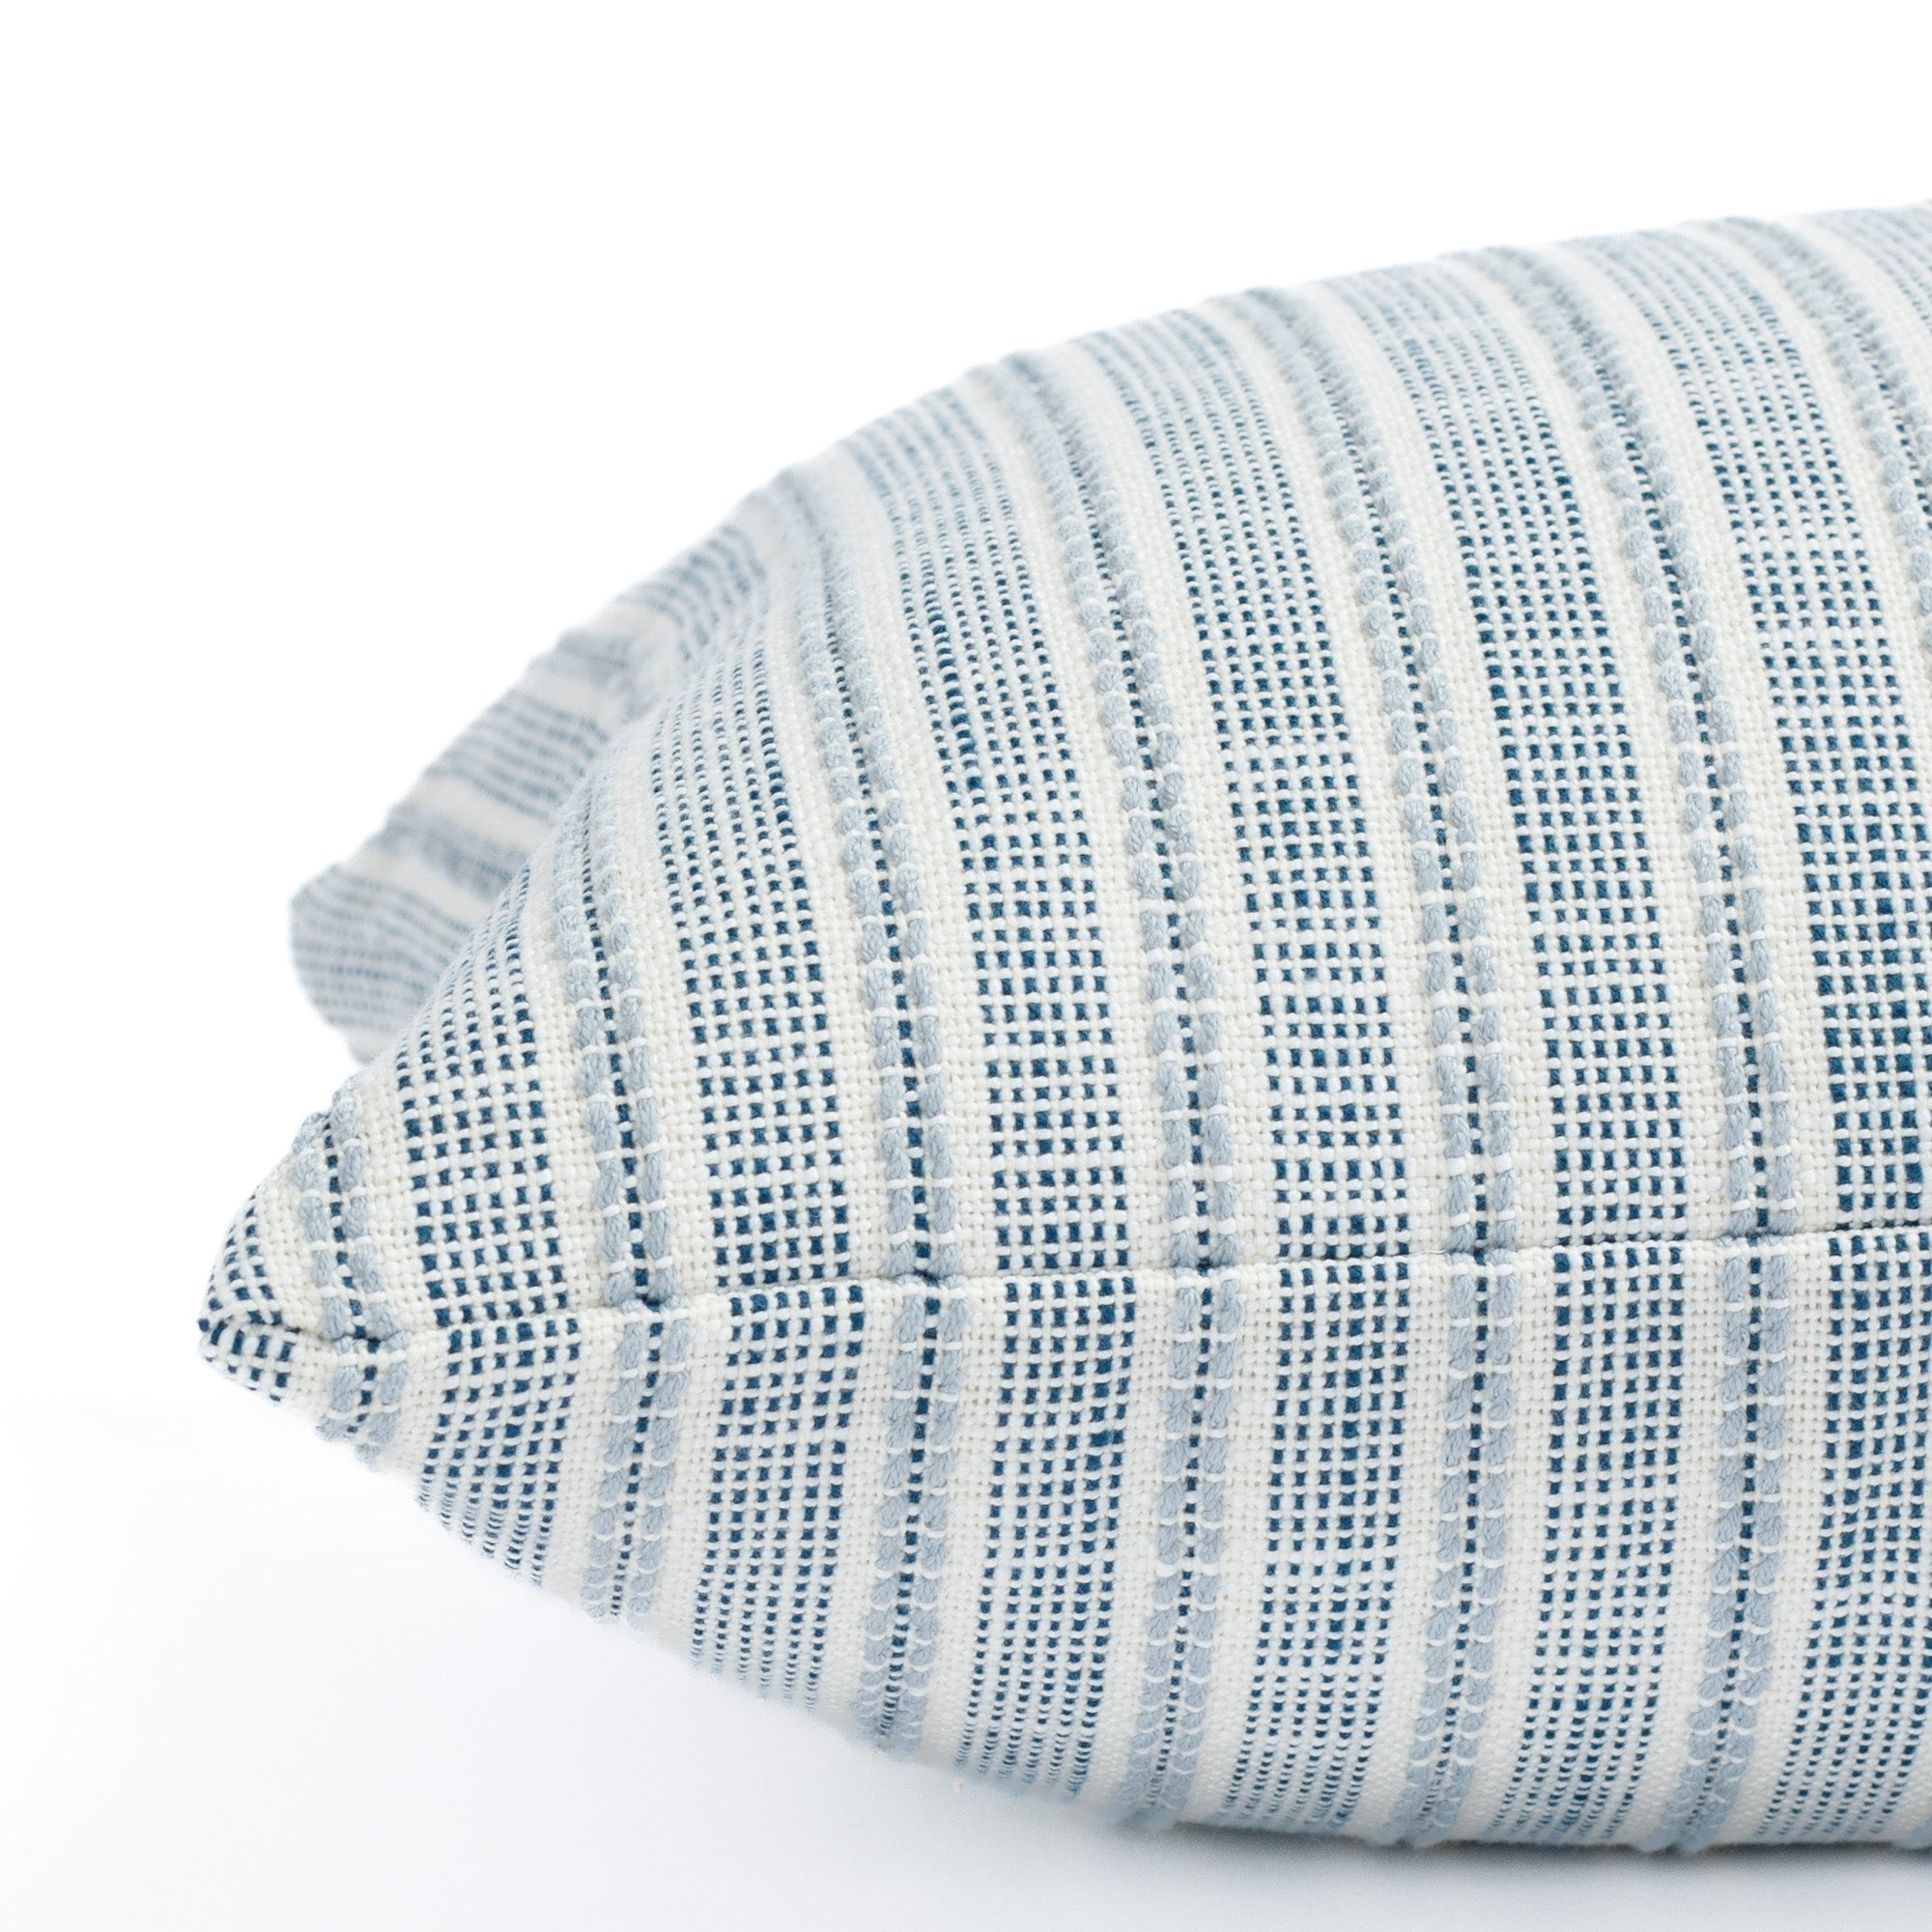 a white and blue outdoor throw pillow : close up side view